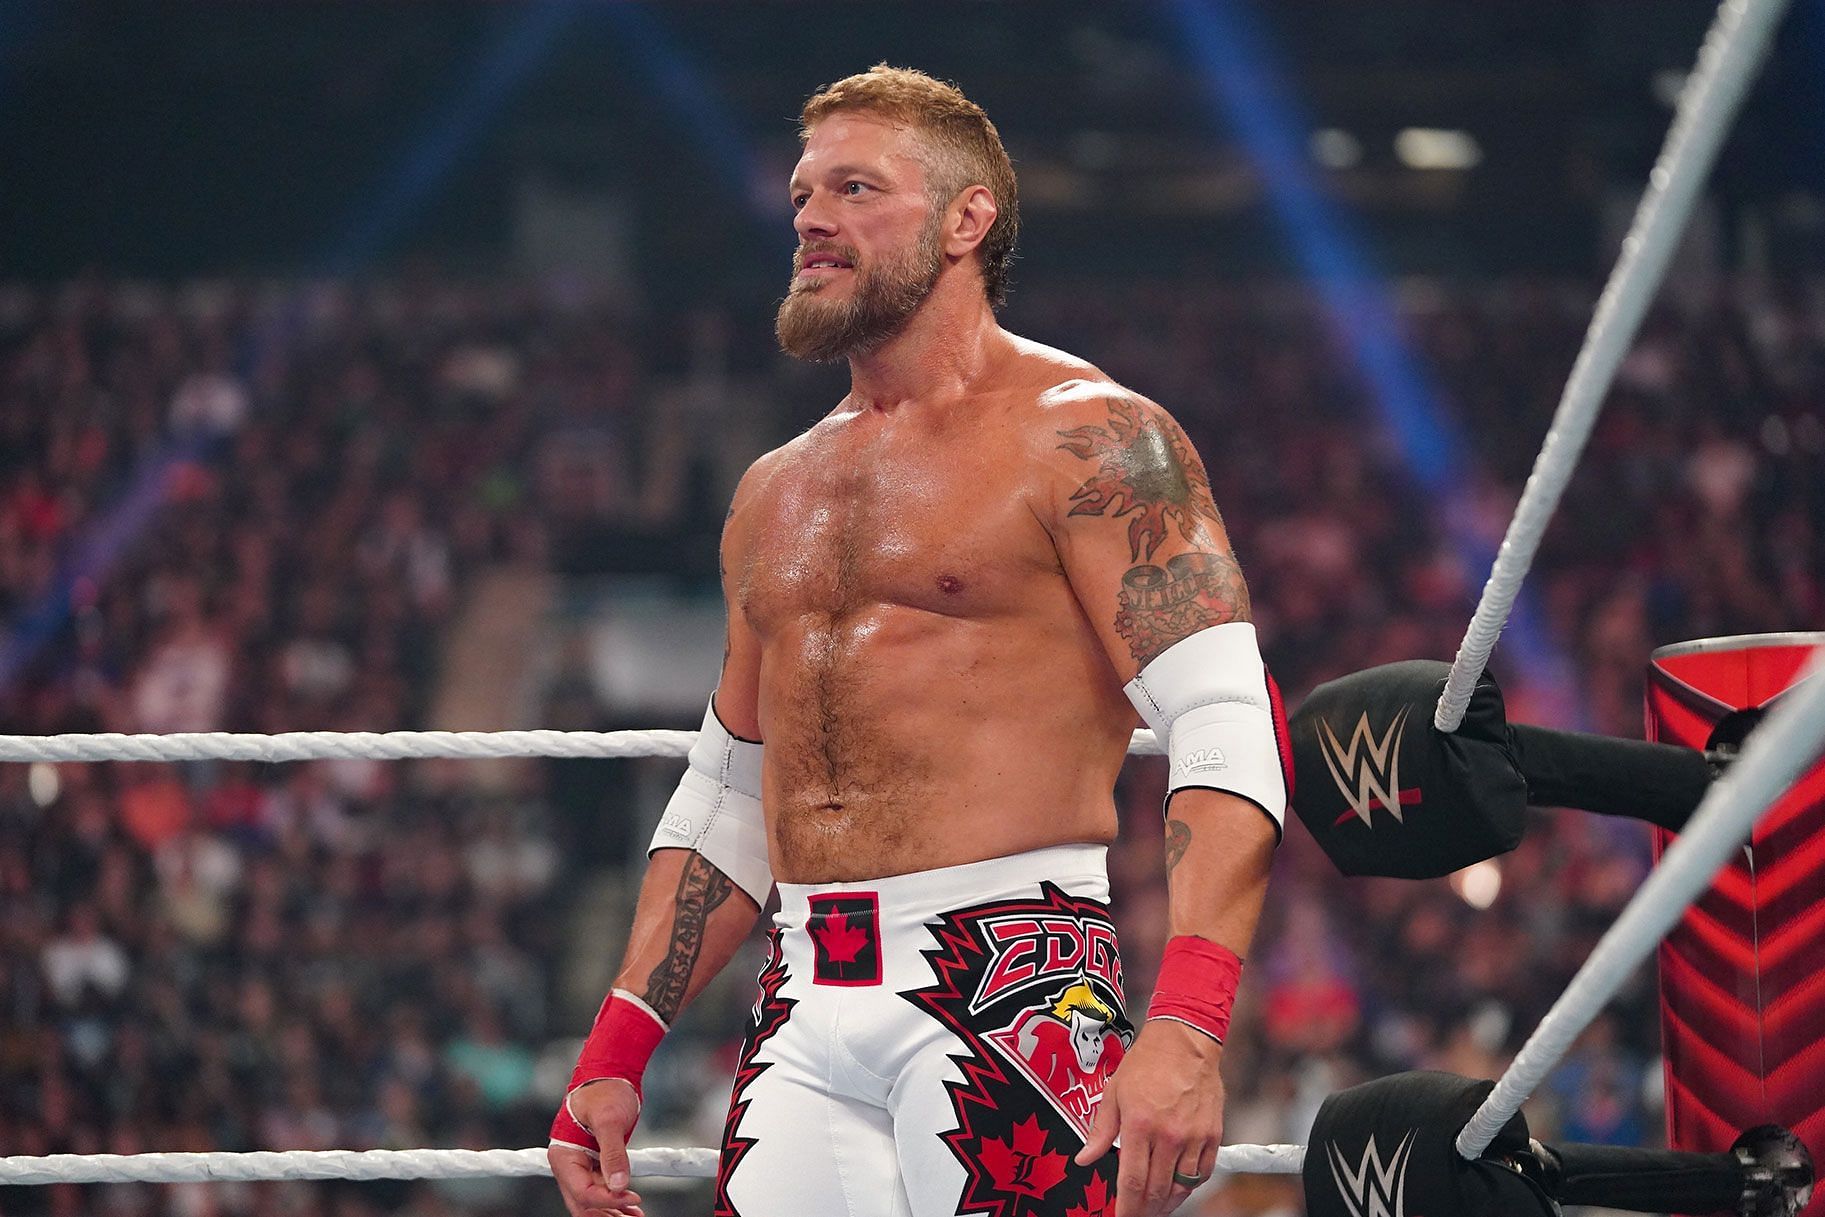 Edge could return to WWE on SmackDown